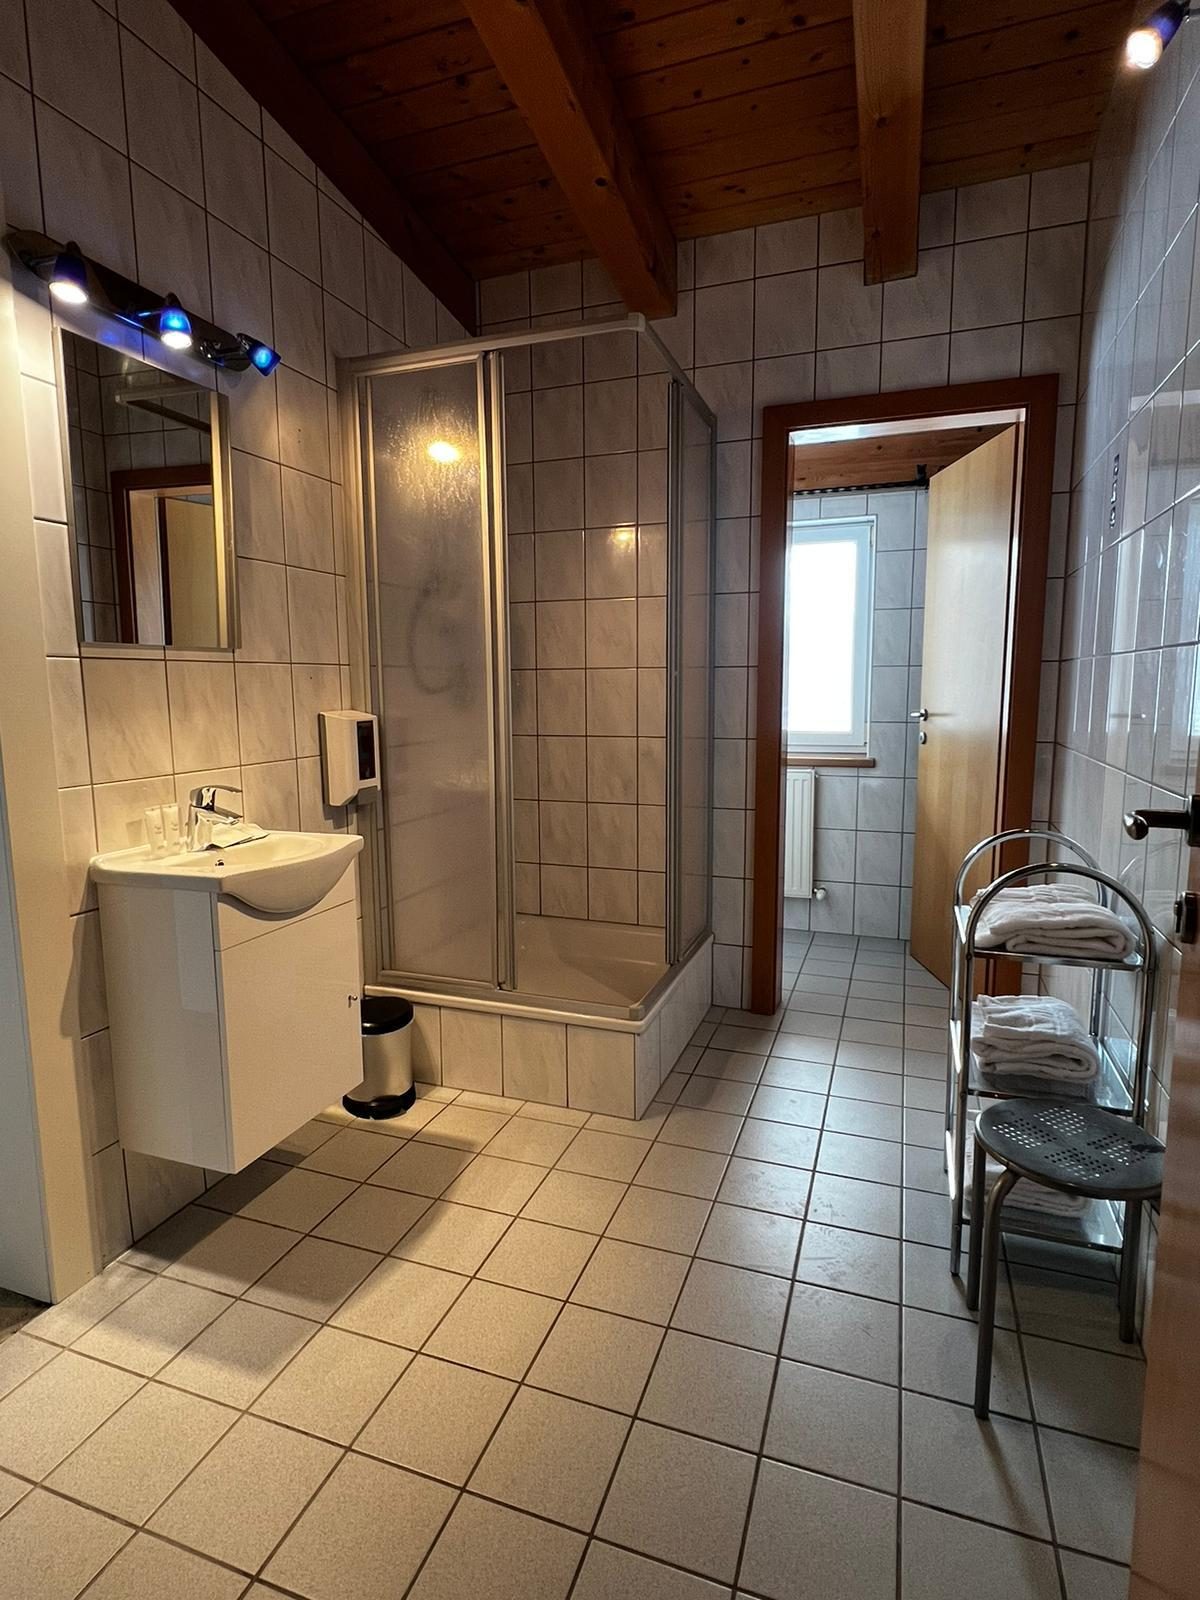 NEW: Private sanitary facilities